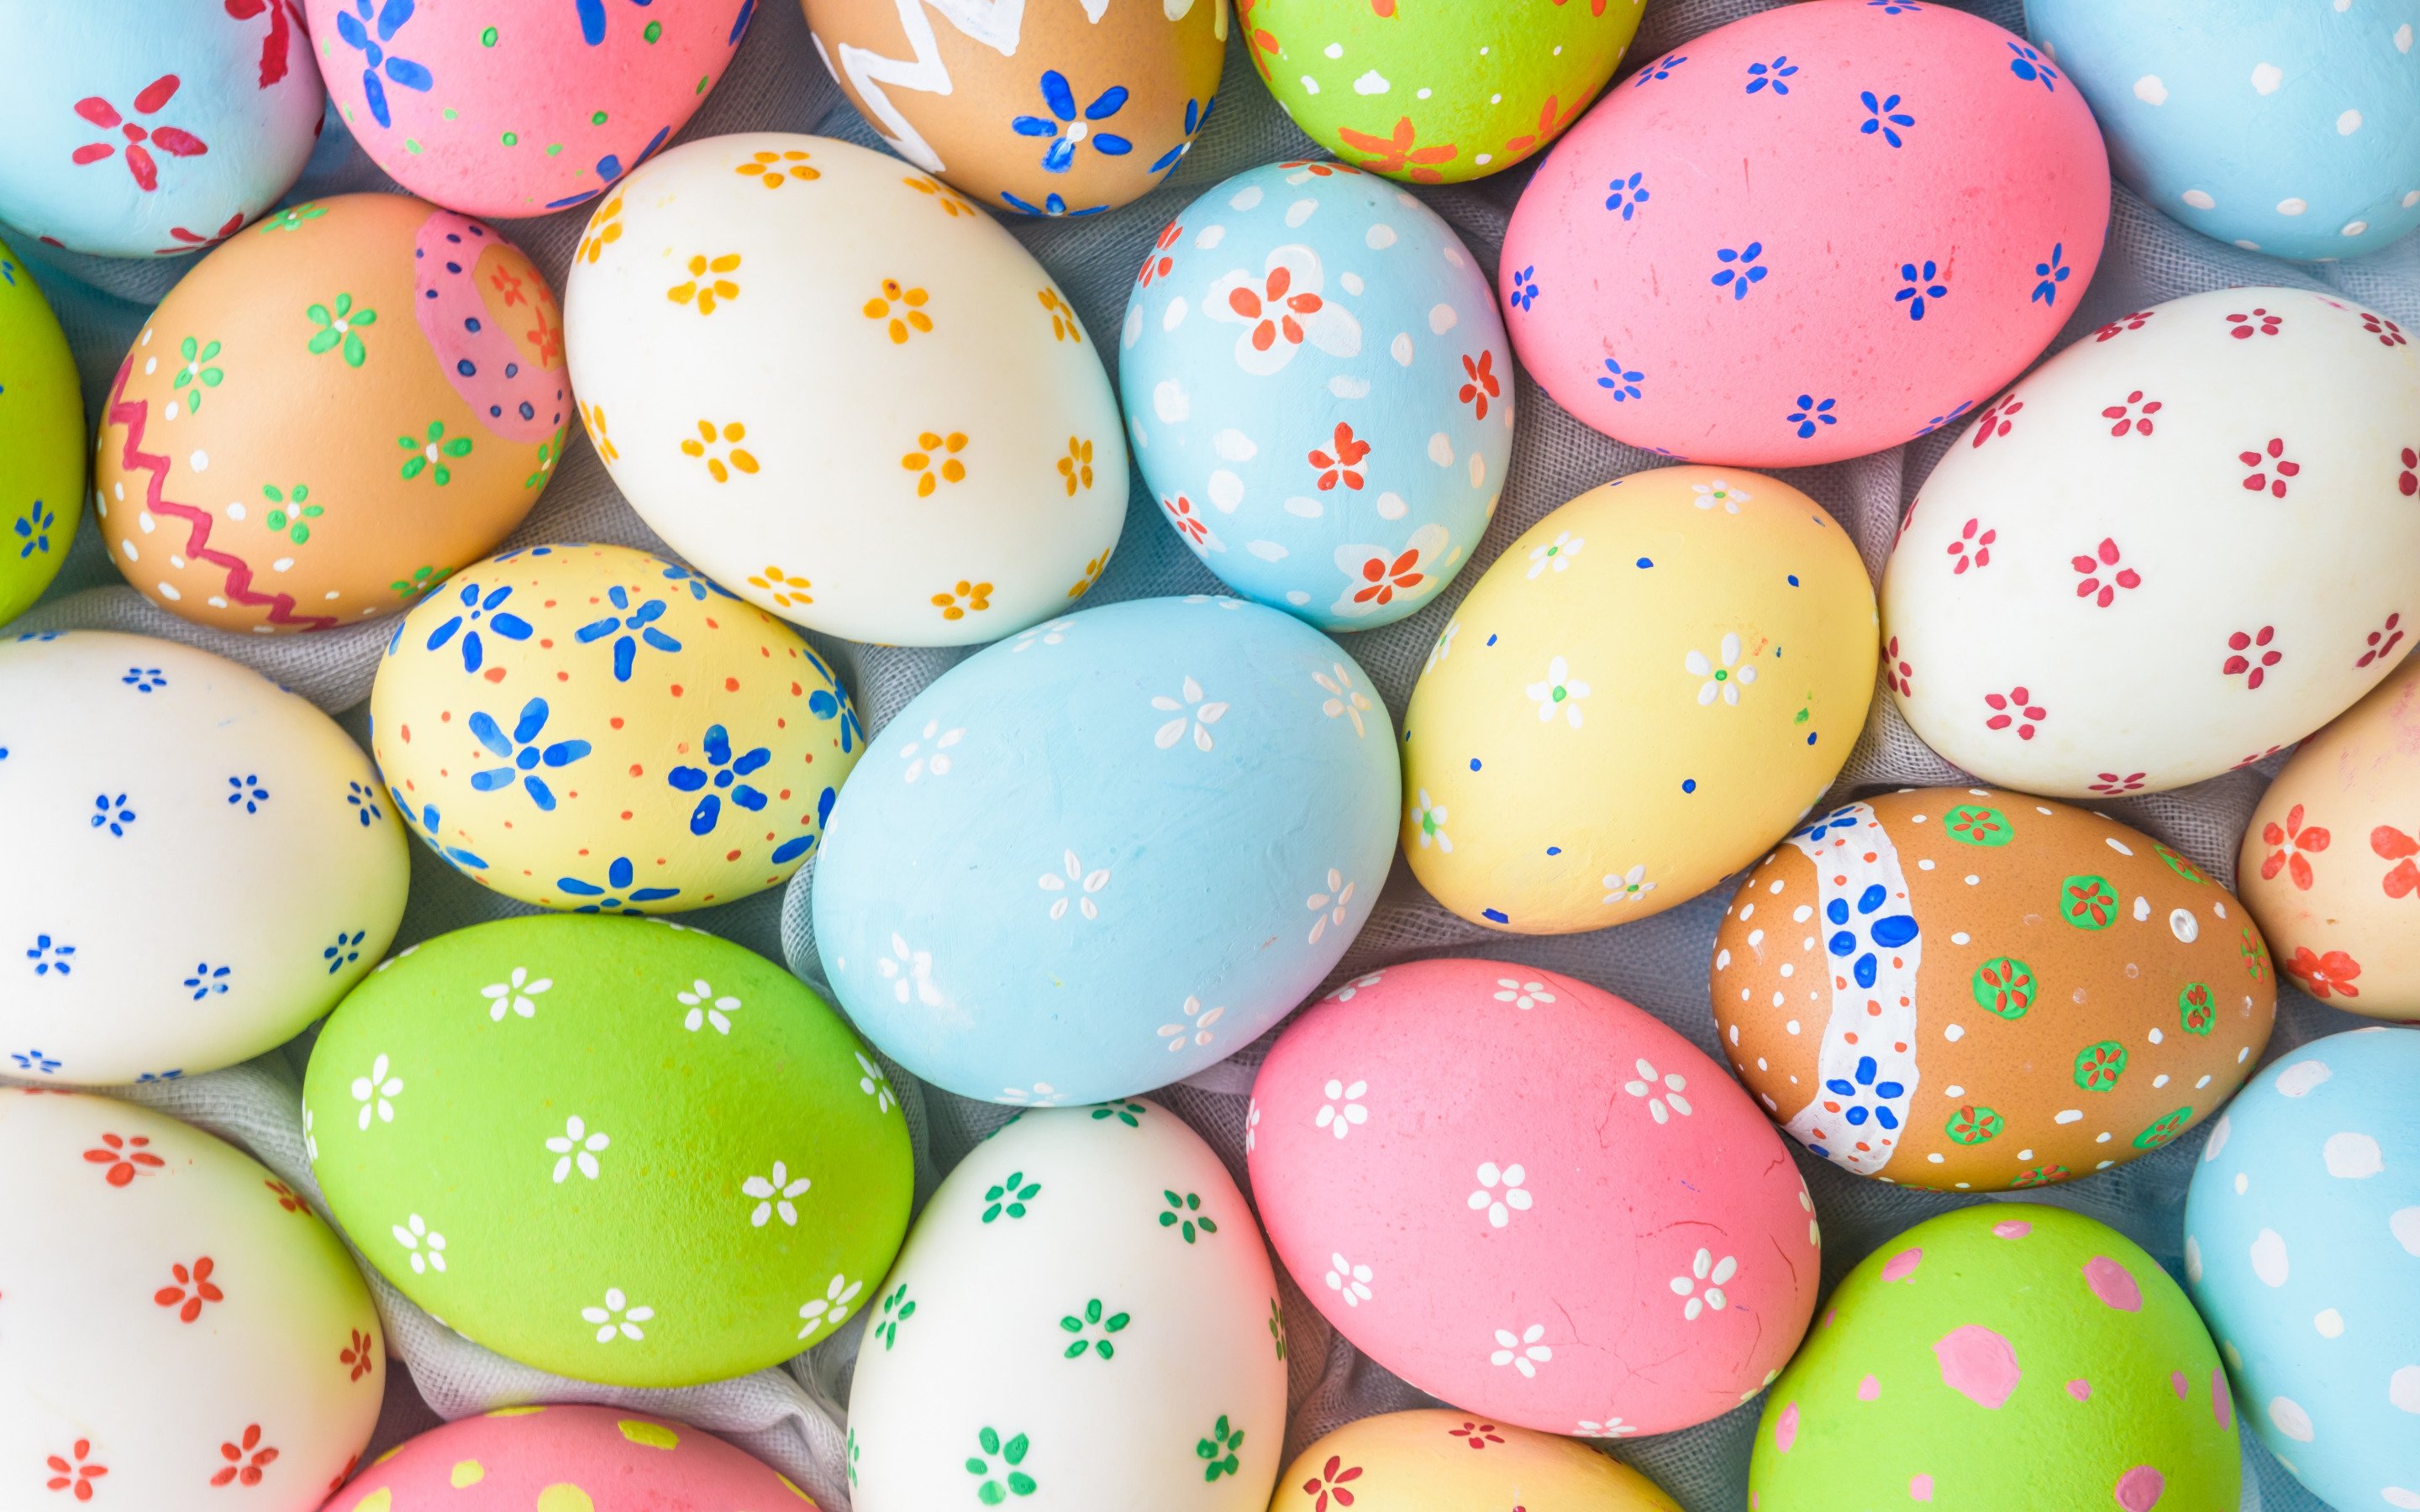 Download Wallpaper Multi Colored Easter Eggs, Easter Background, Eggs, Spring, Easter For Desktop With Resolution 2880x1800. High Quality HD Picture Wallpaper